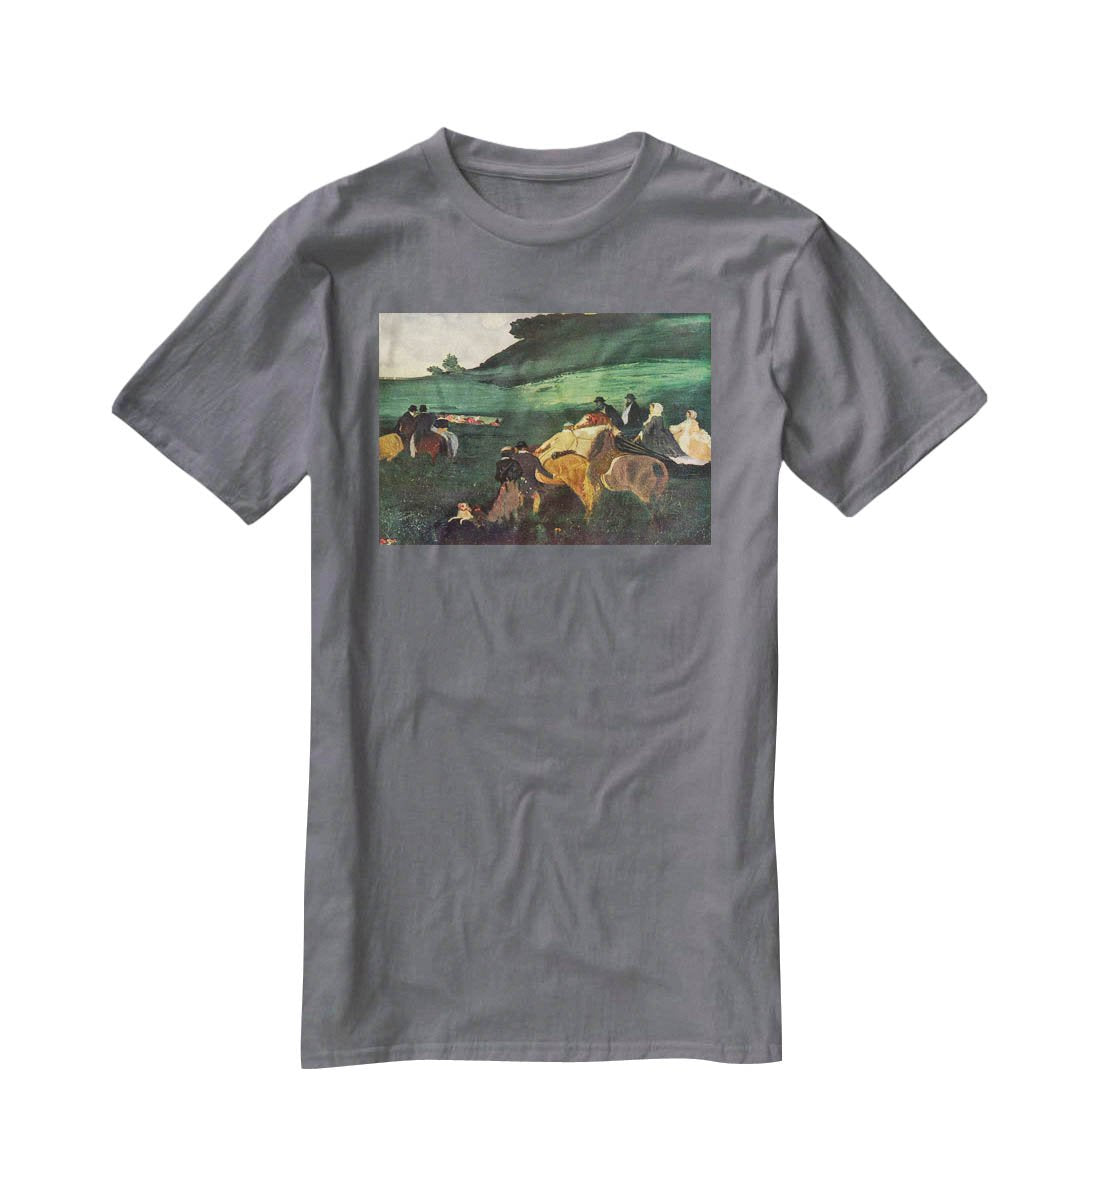 Riders in the landscape by Degas T-Shirt - Canvas Art Rocks - 3